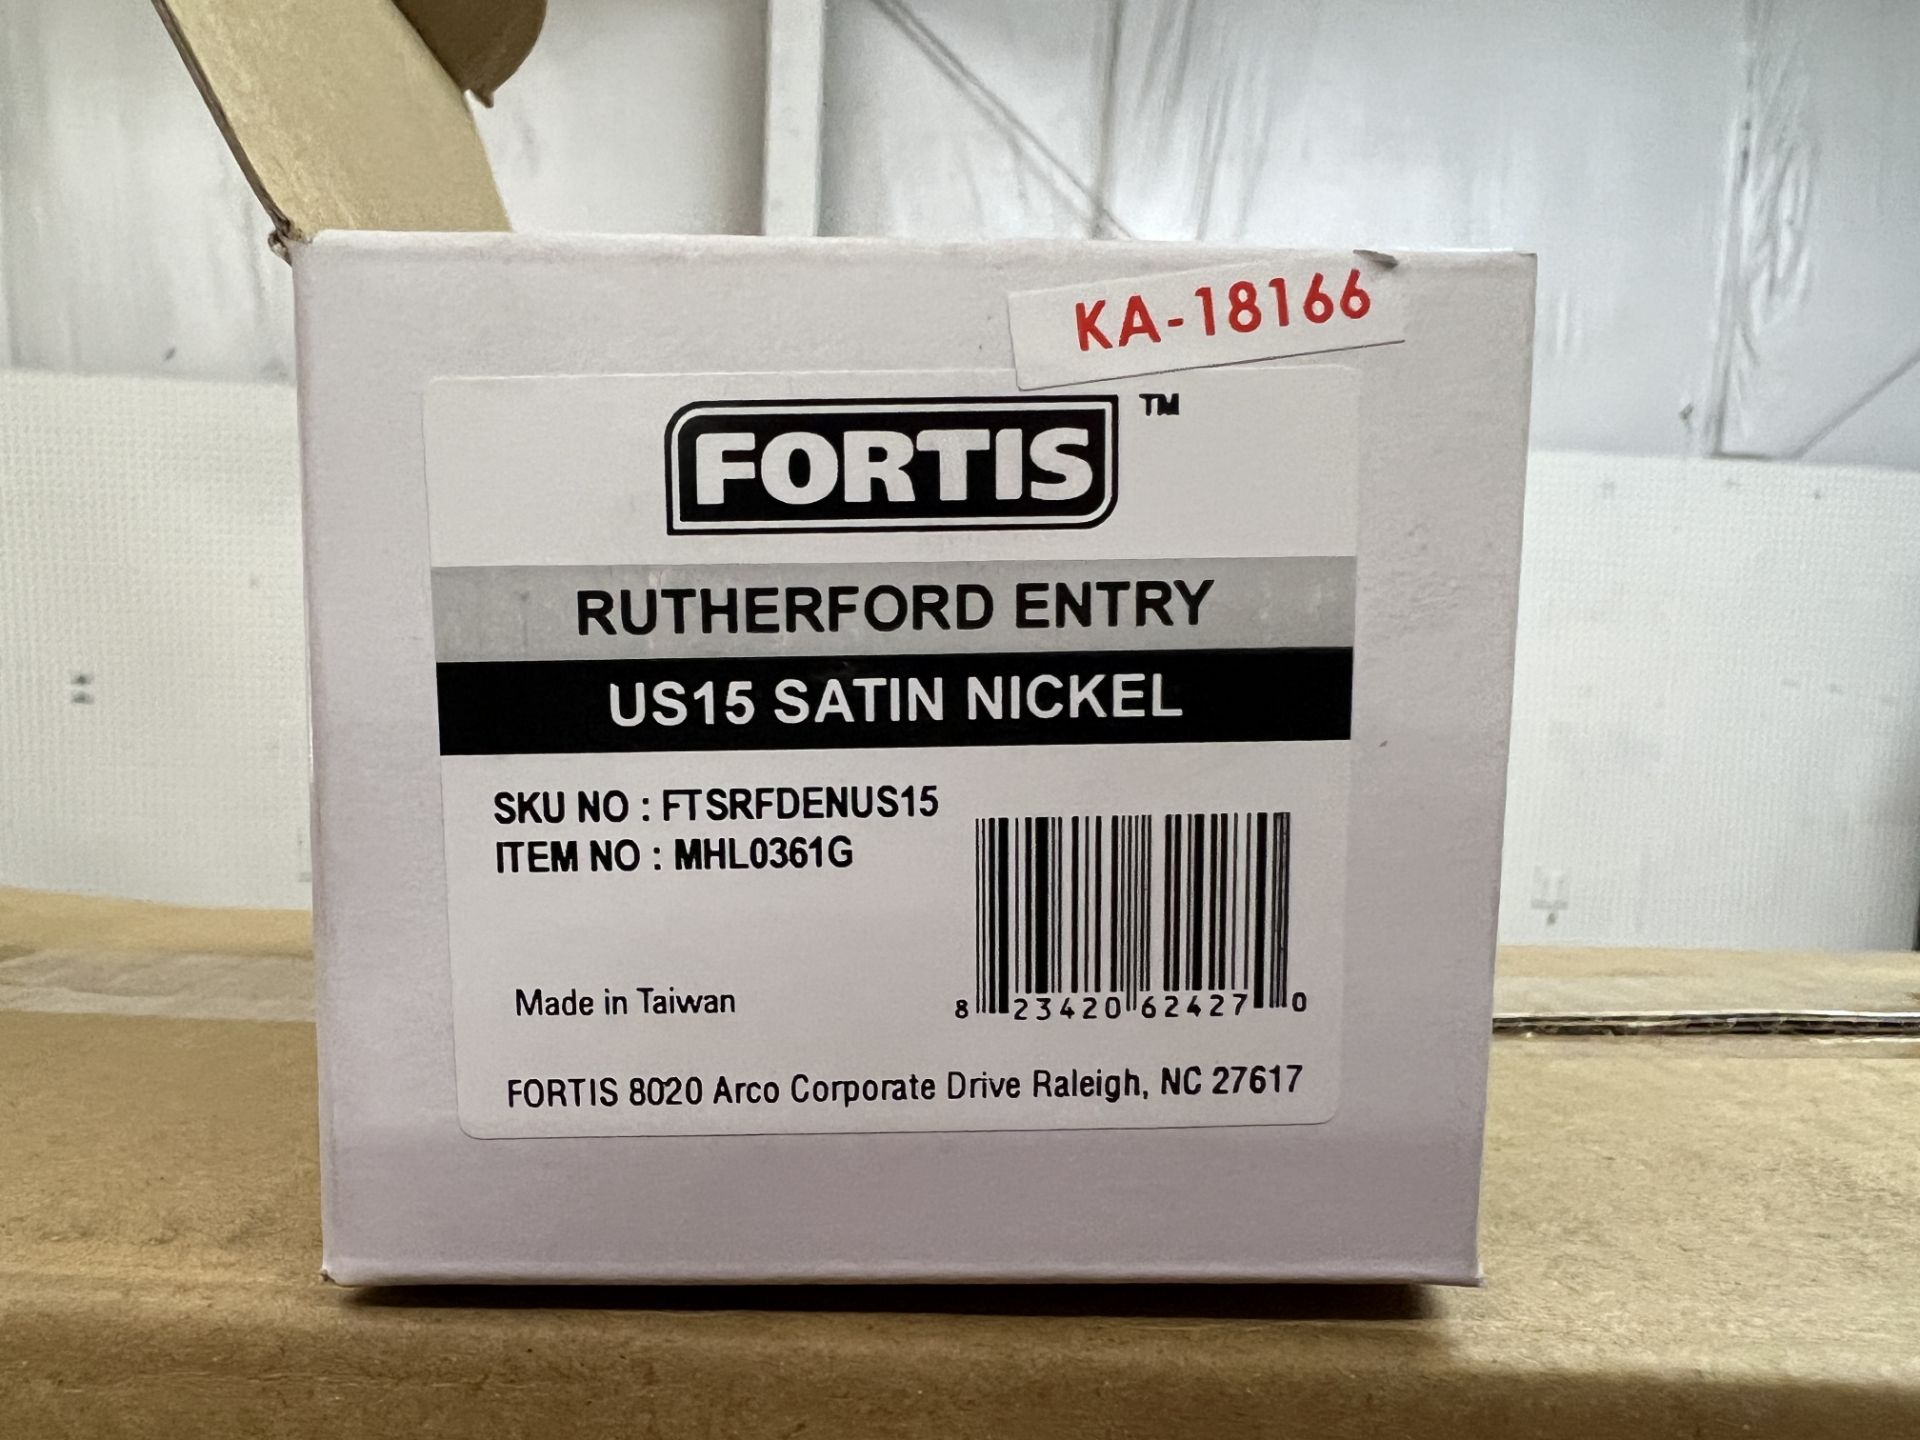 (20) FORTIS RUTHERFORD ENTRY US15 SATIN NICKEL - Image 2 of 4